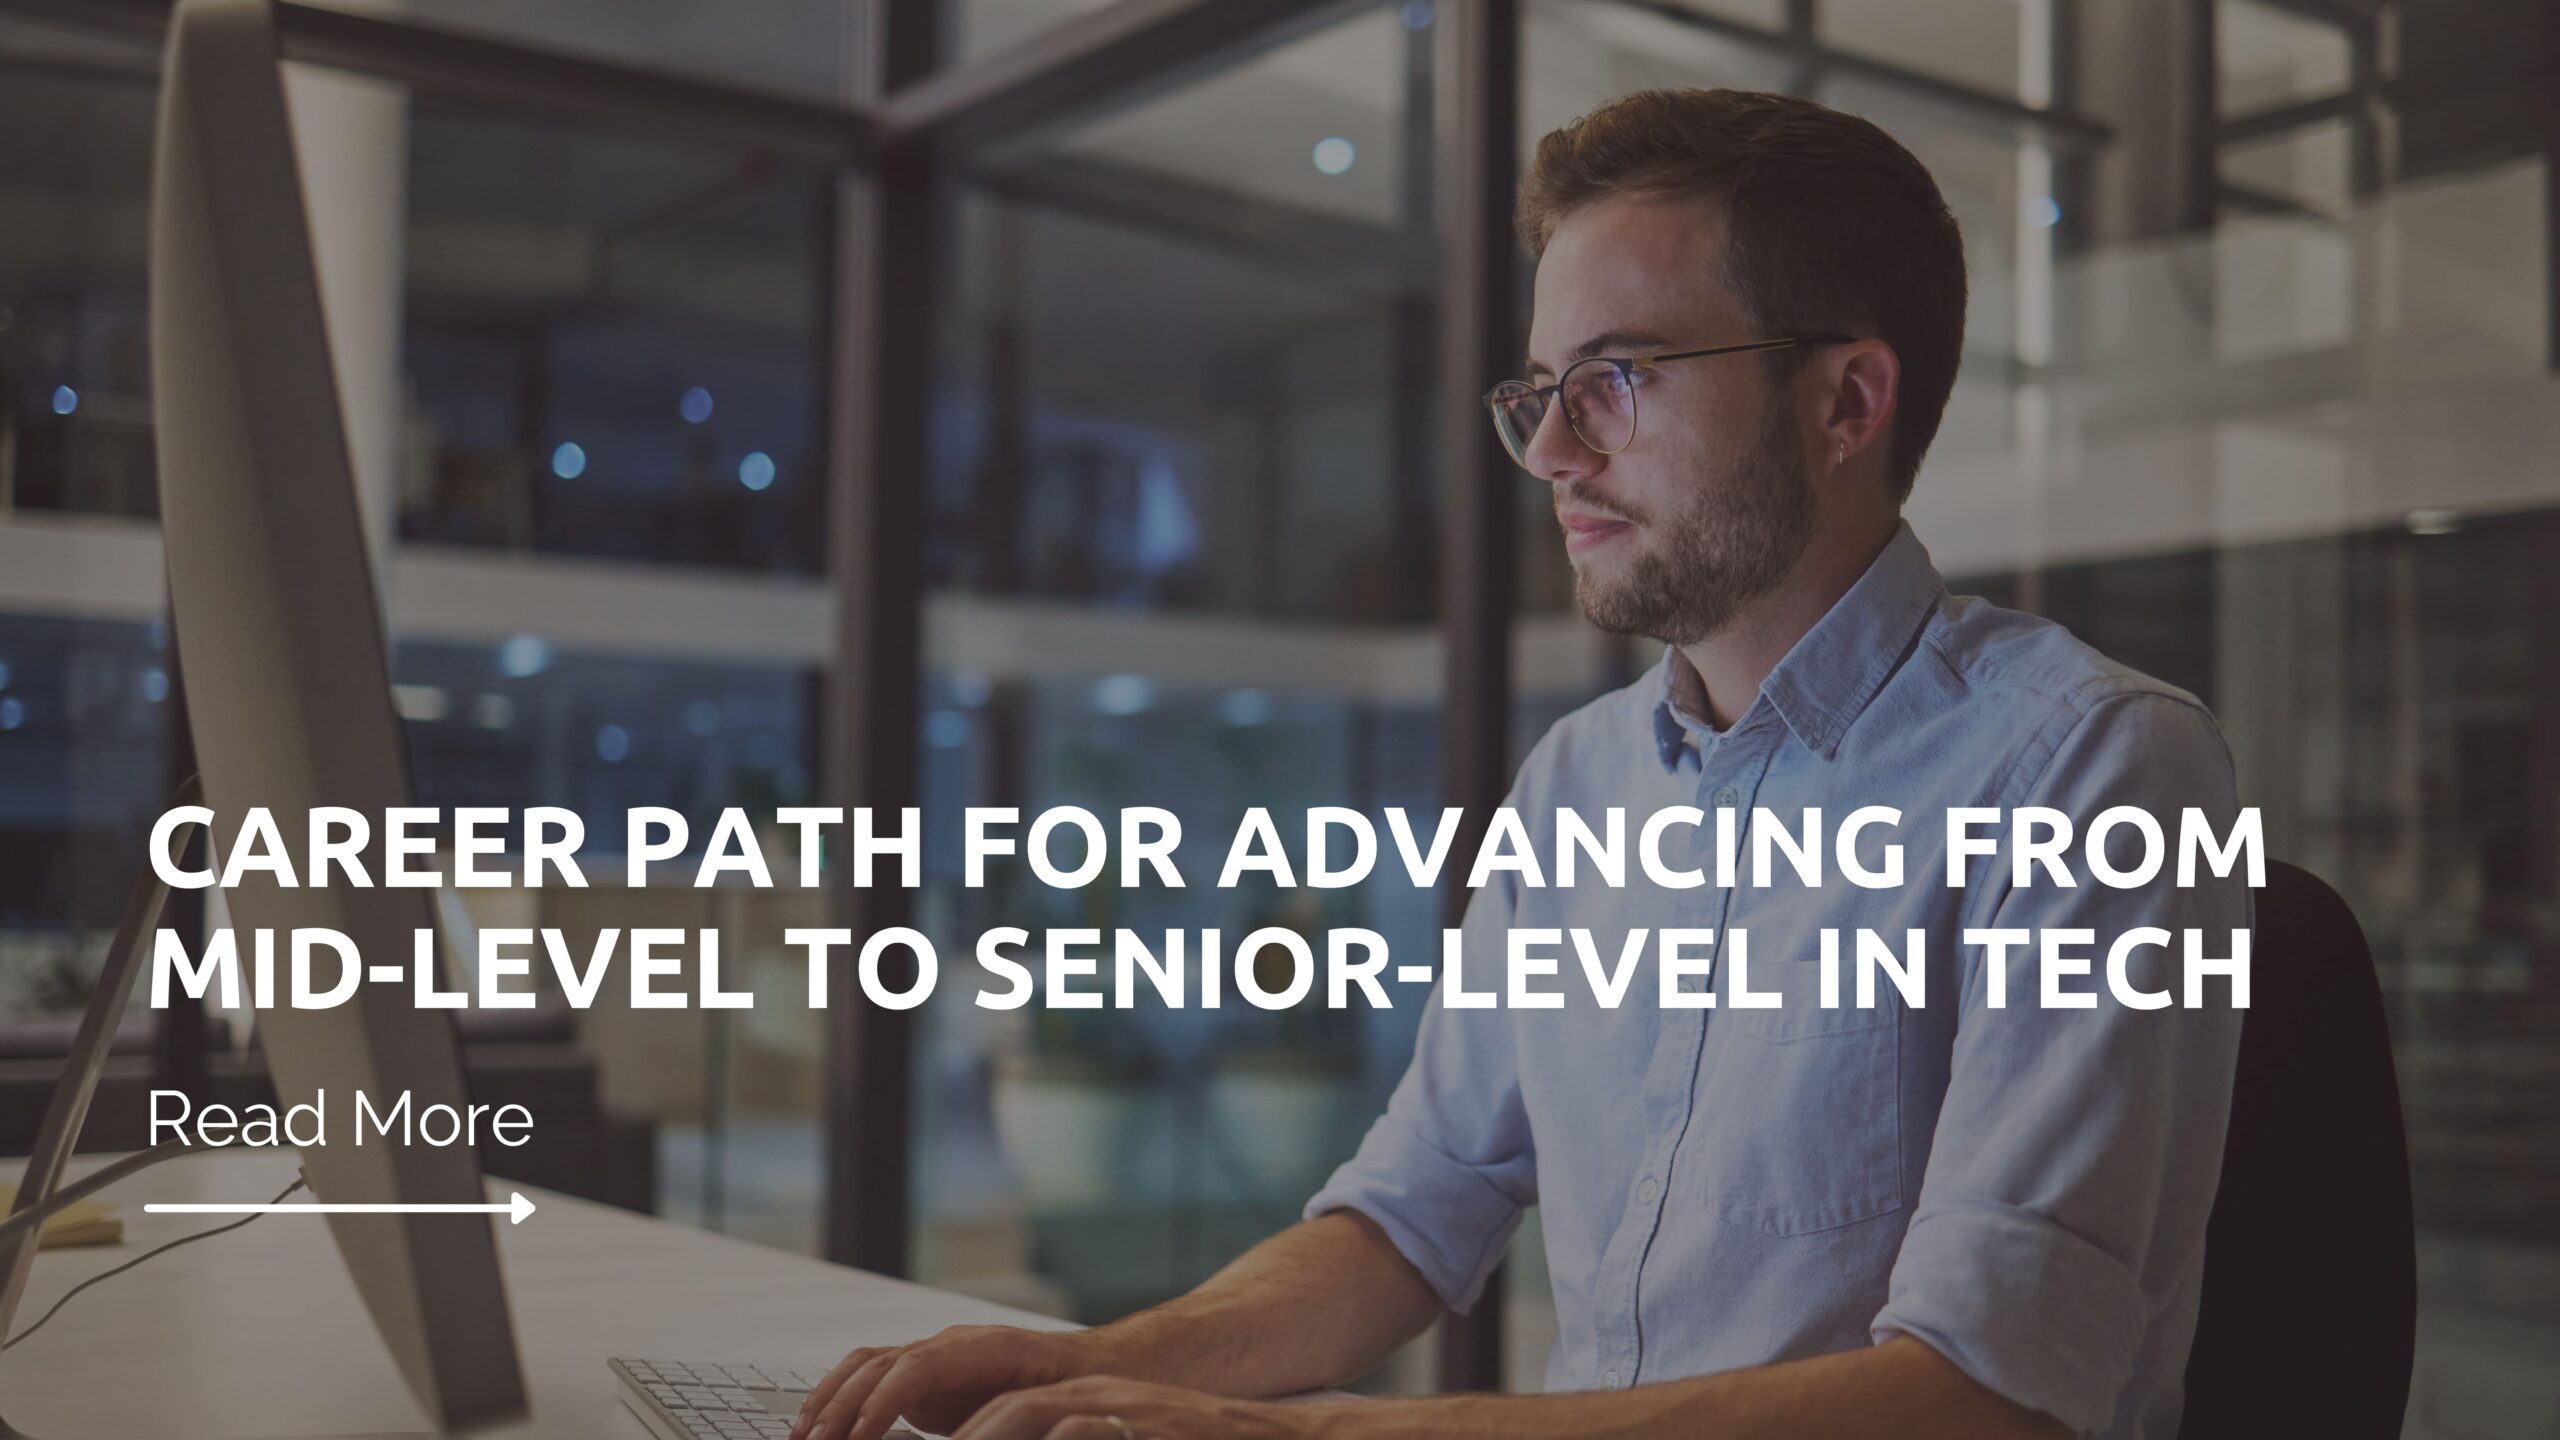 Career Path for Advancing from Mid-level to Senior-Level in Tech